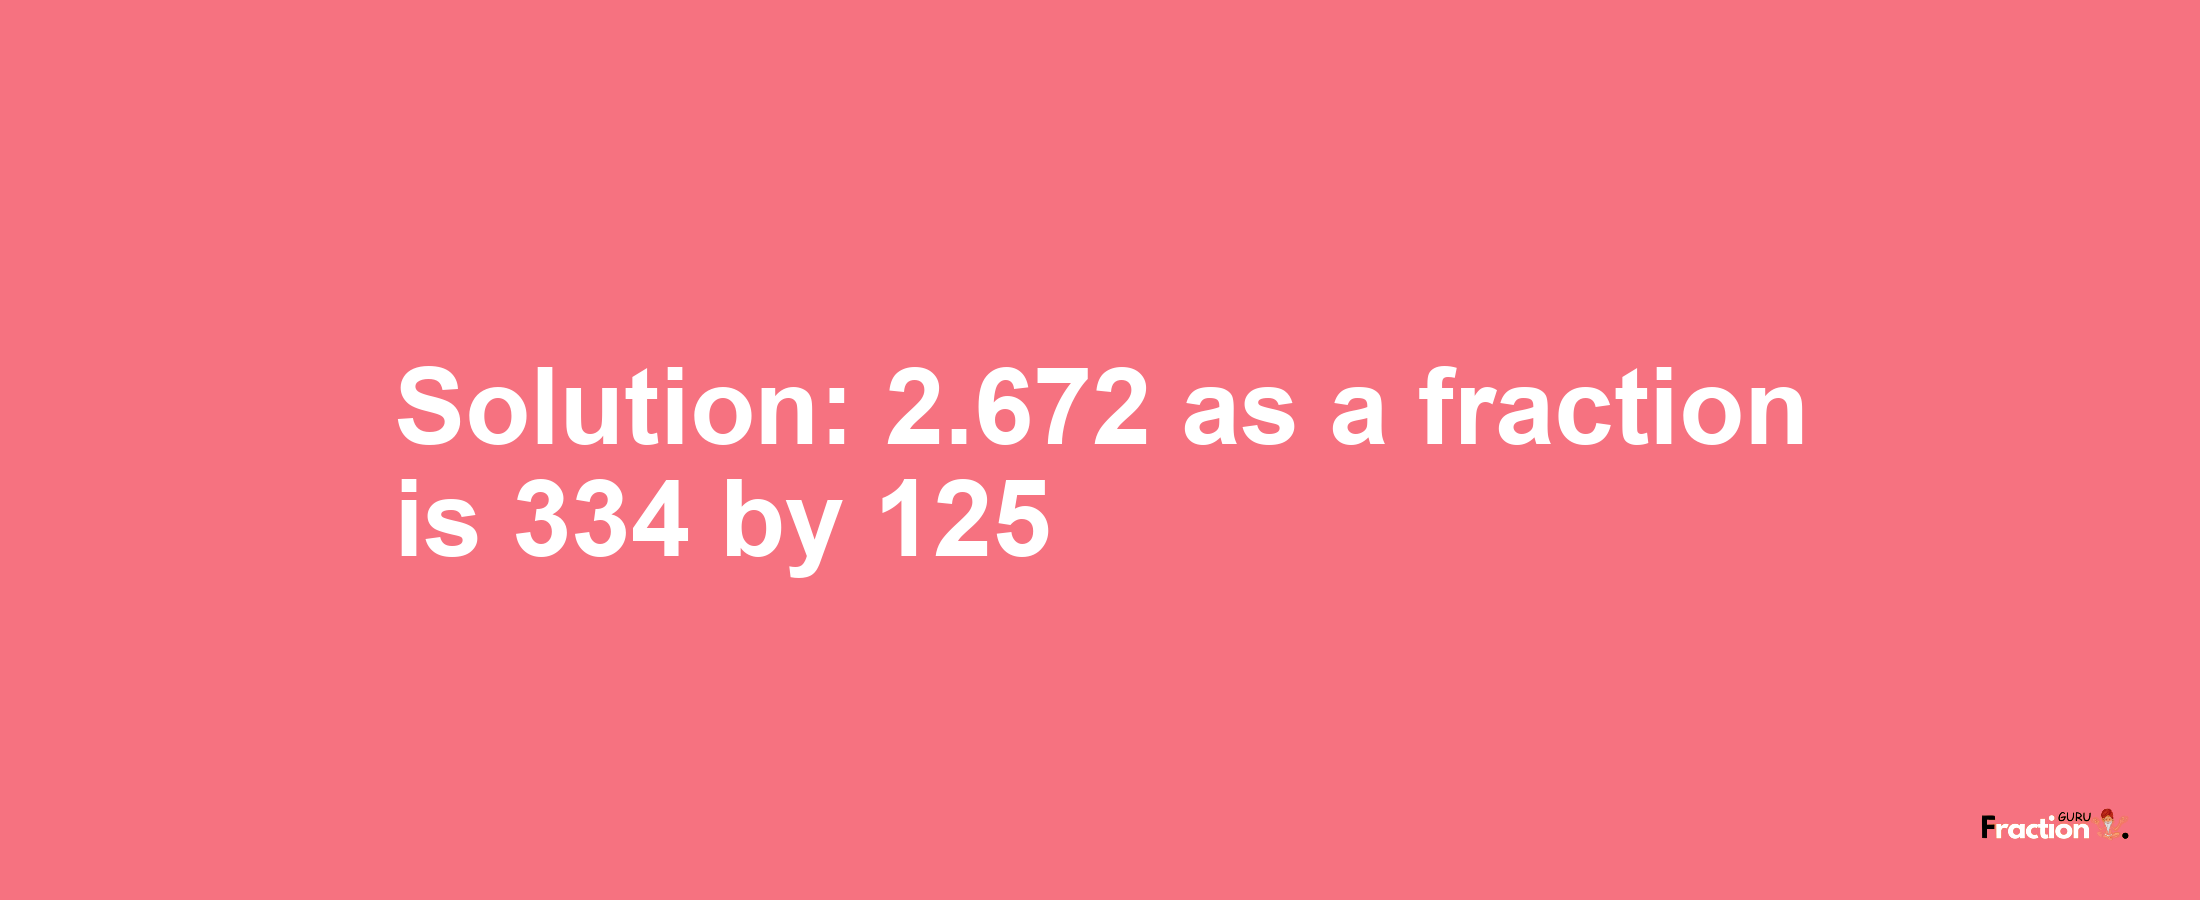 Solution:2.672 as a fraction is 334/125